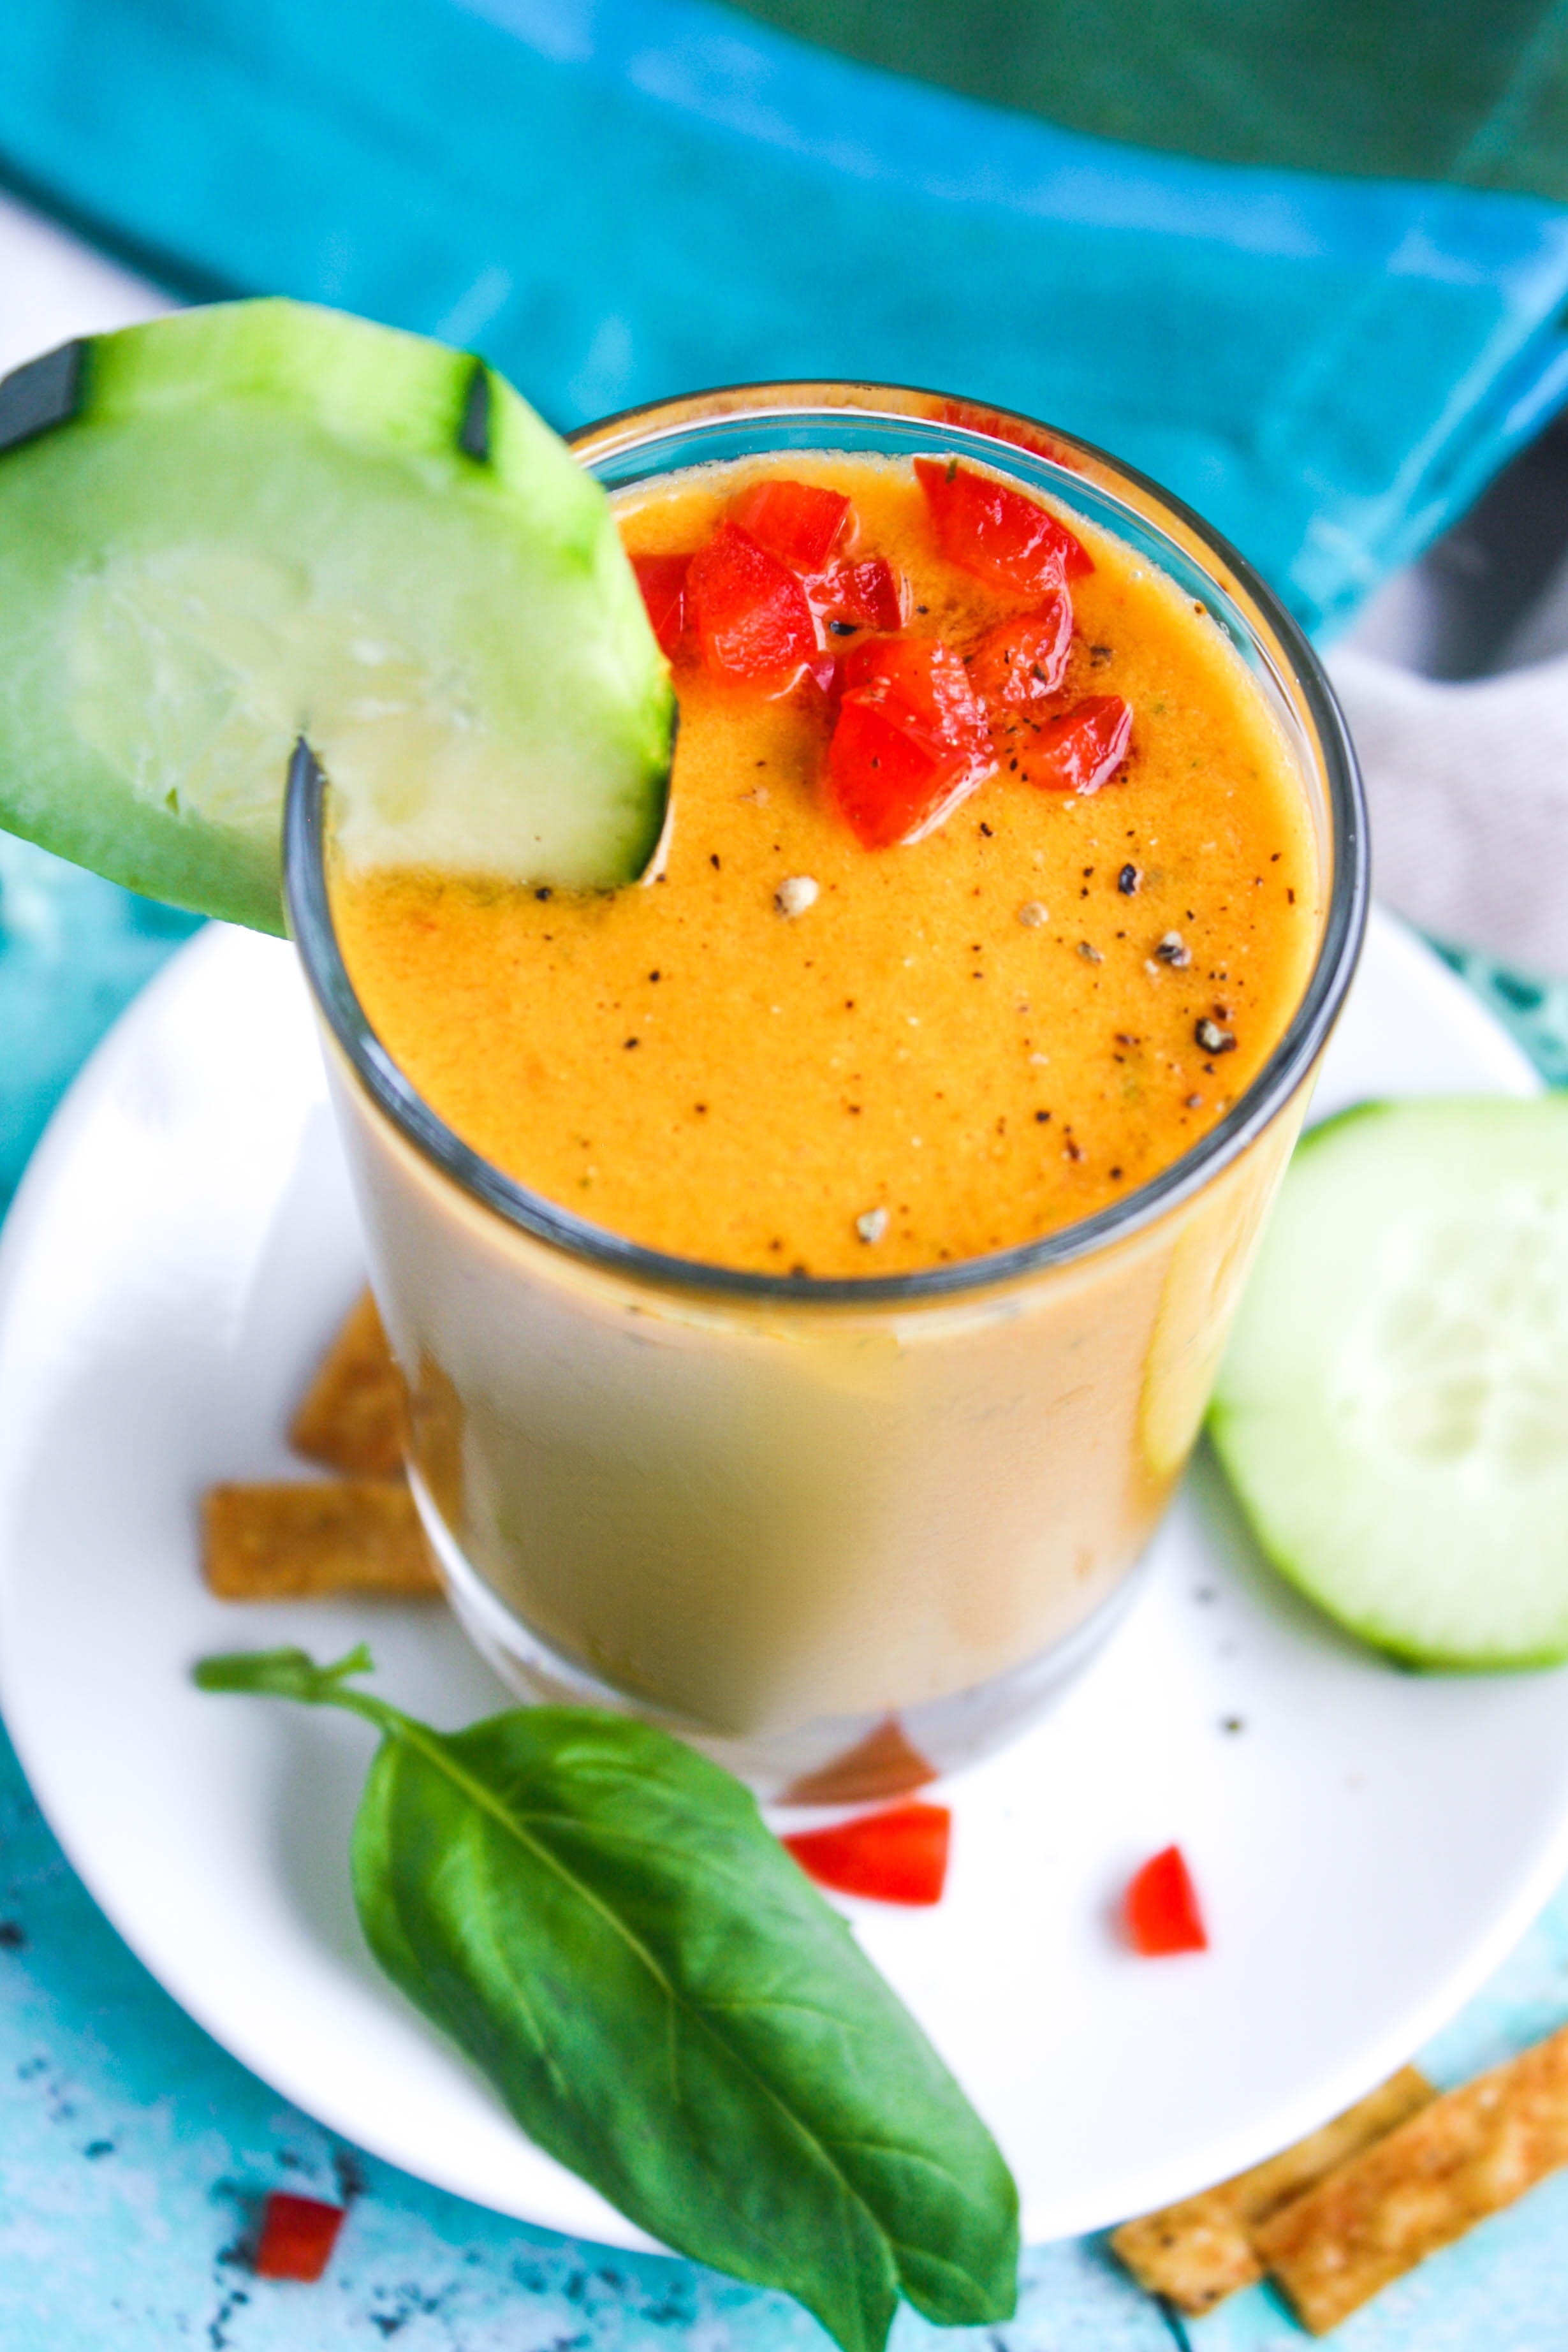 Yellow Heirloom Tomato Gazpacho is a seasonal treat and makes a great appetizer. Yellow Heirloom Tomato Gazpacho is so fresh and colorful!